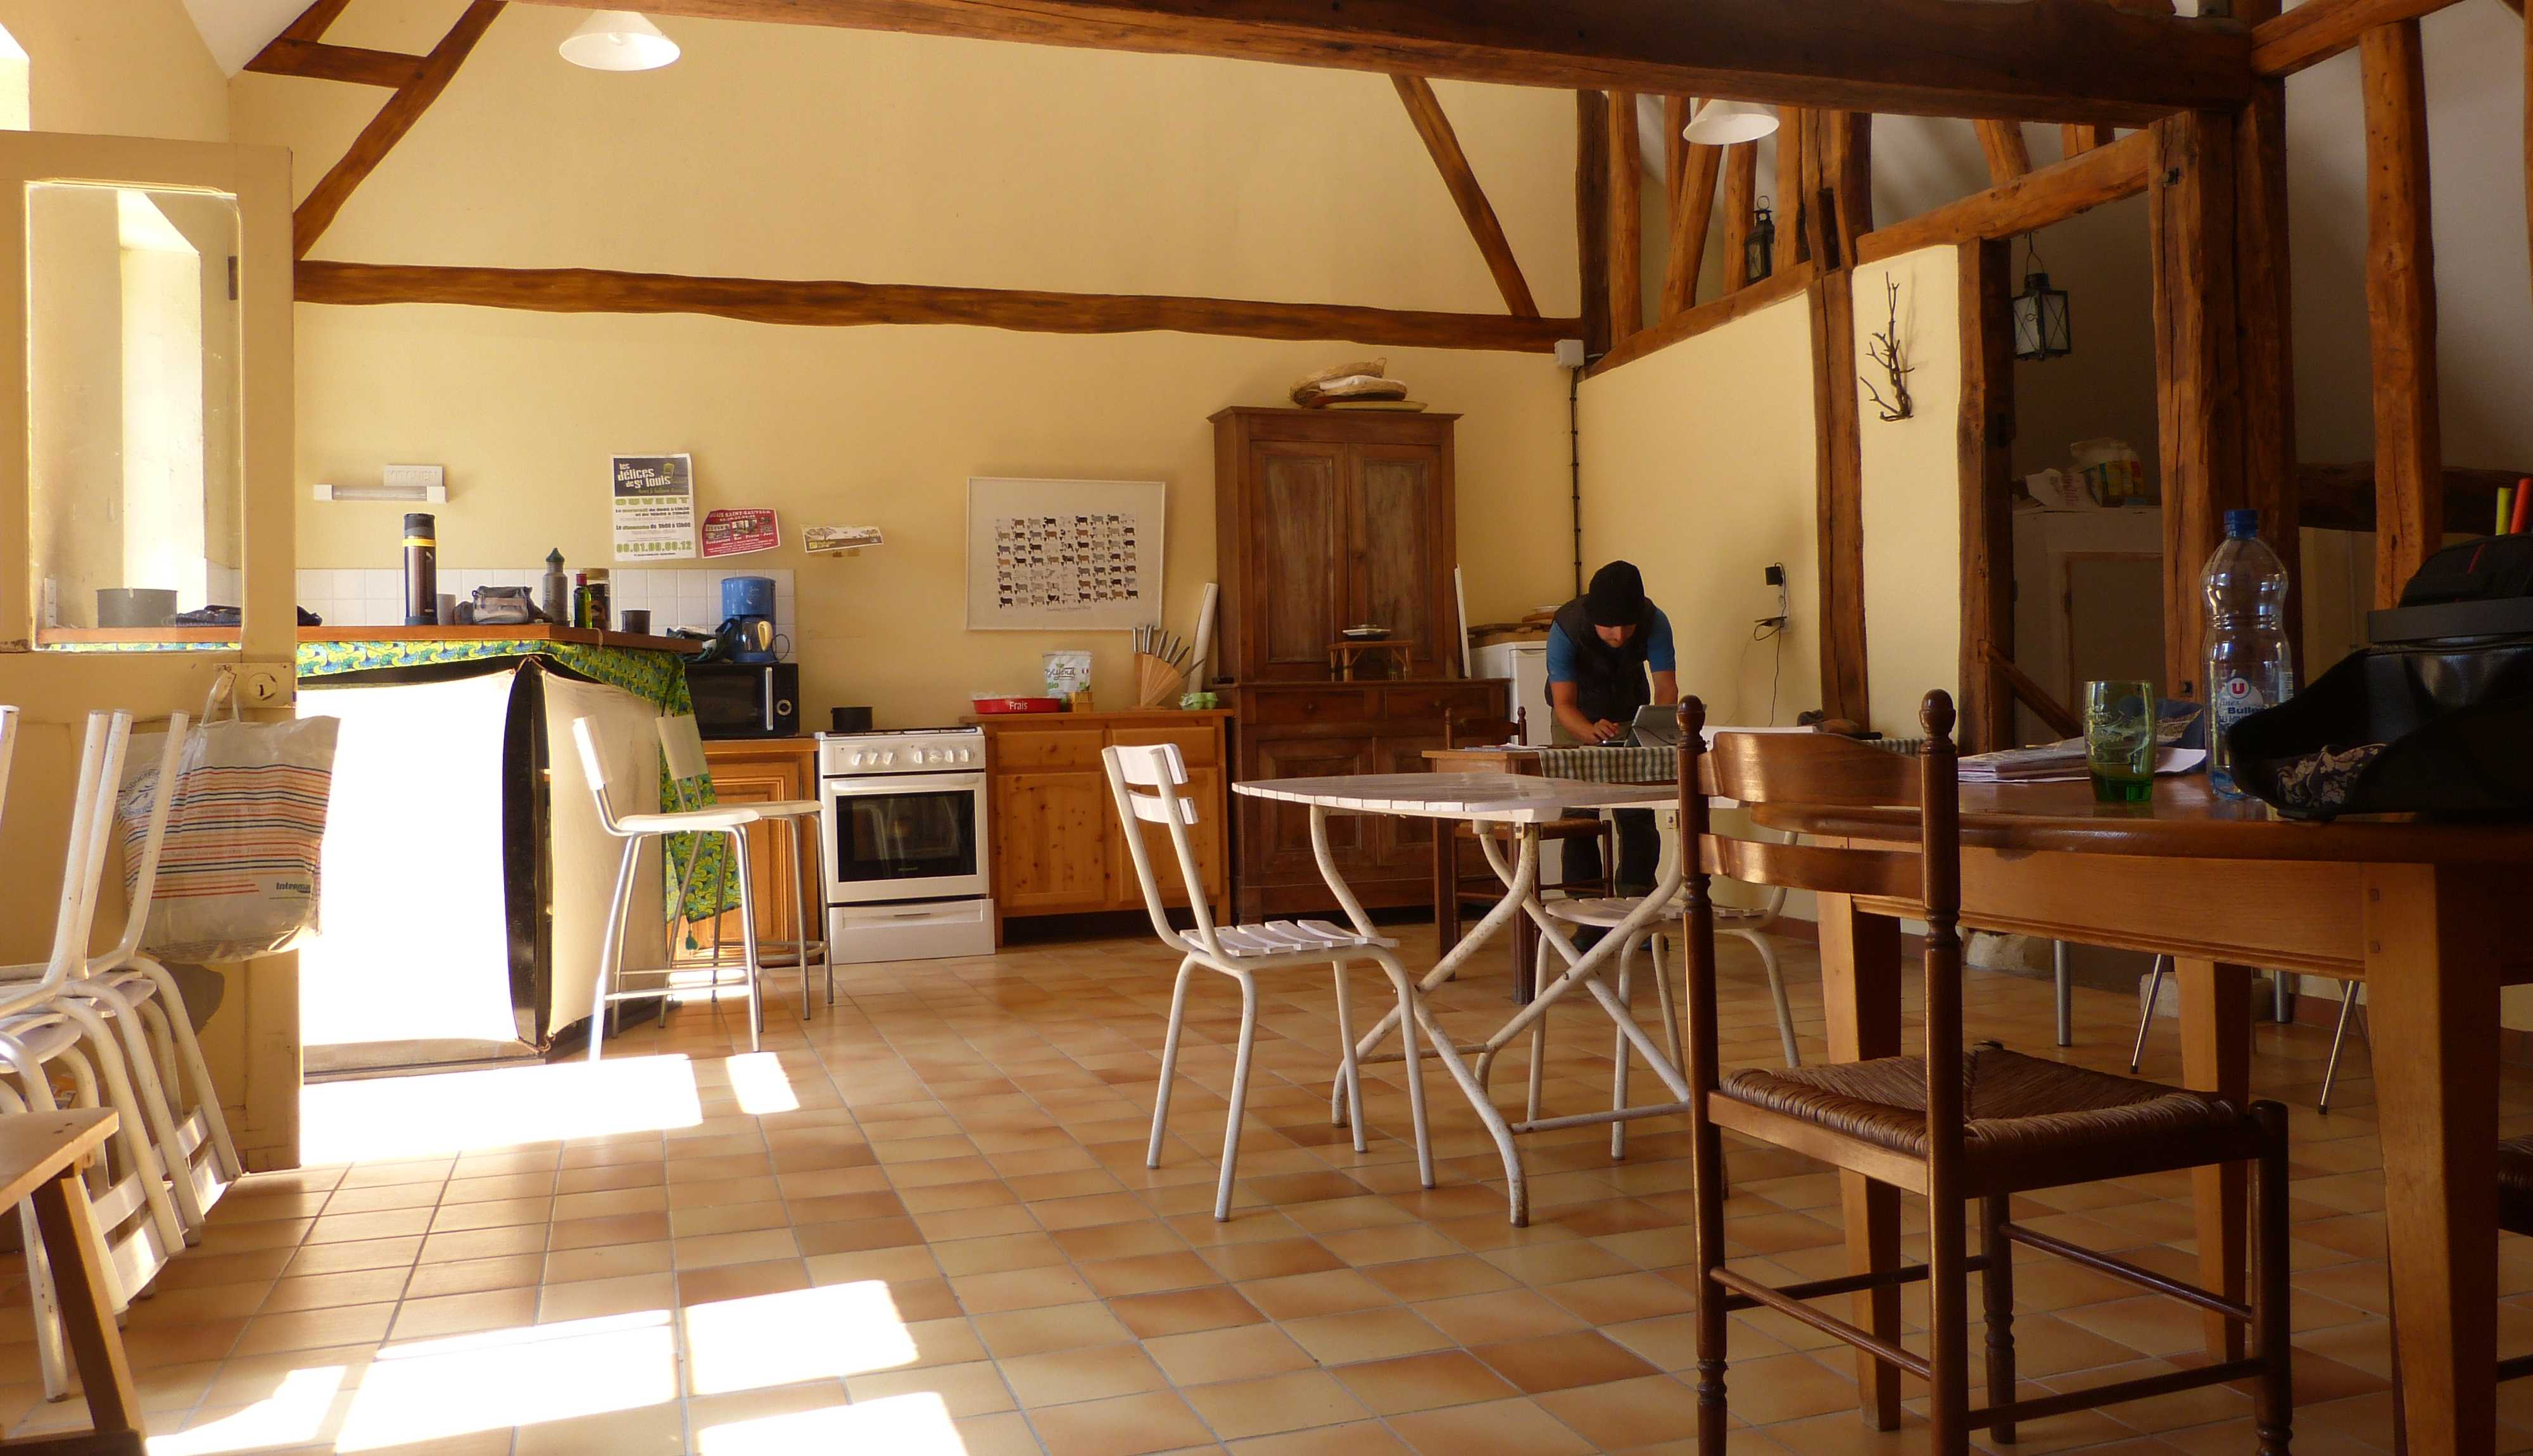 The inside of the barn, with plenty of office space and the amazing kitchen in the background